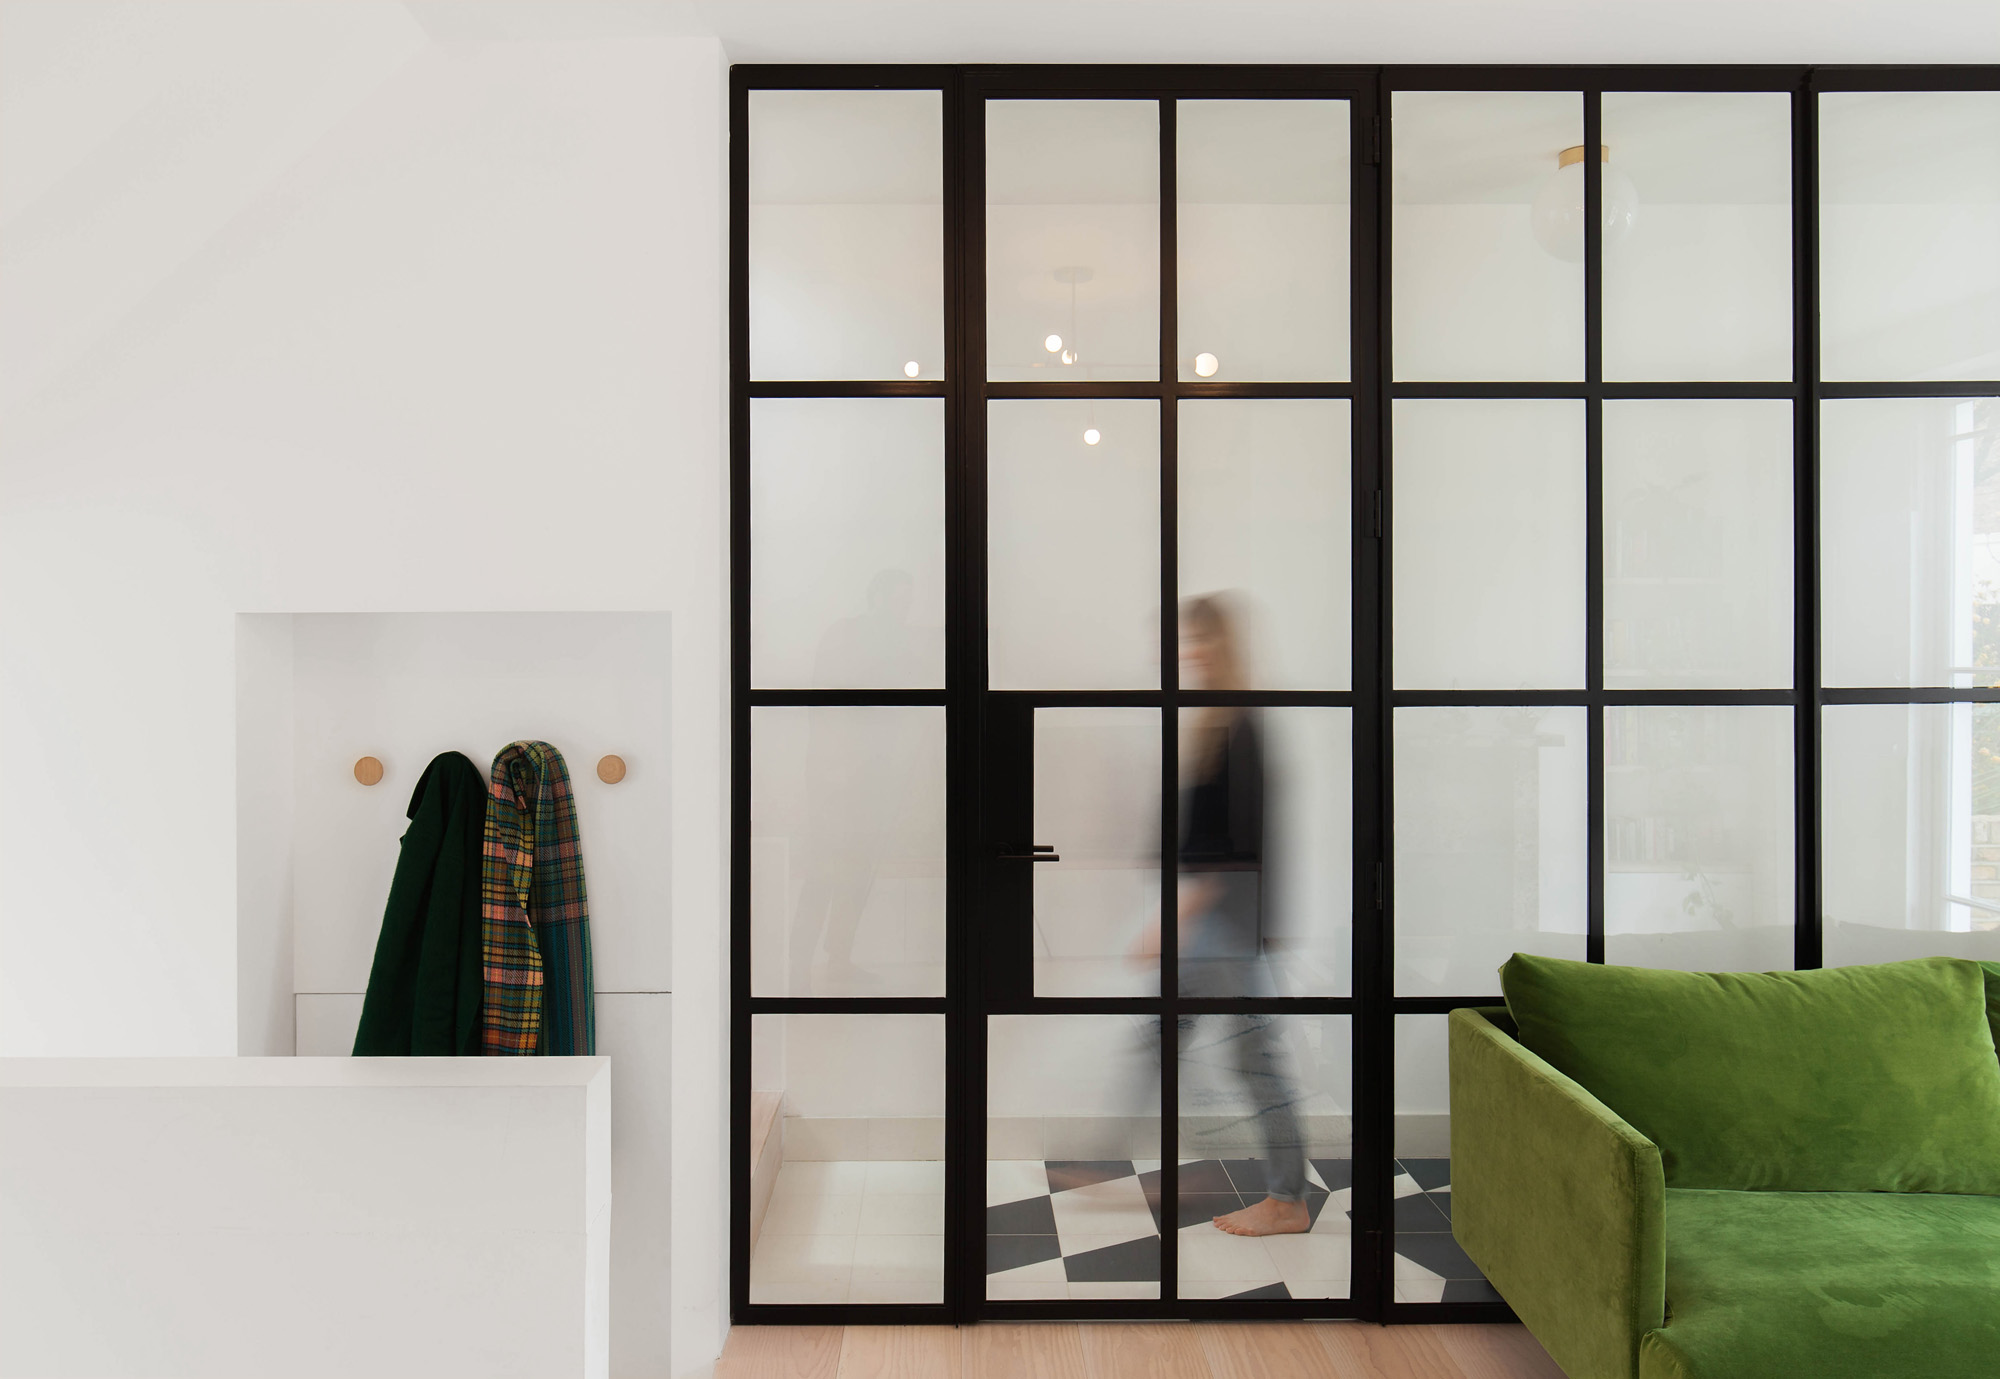 Crittall Doors by Magri Williams - contemporary architecture and interior design studio in London